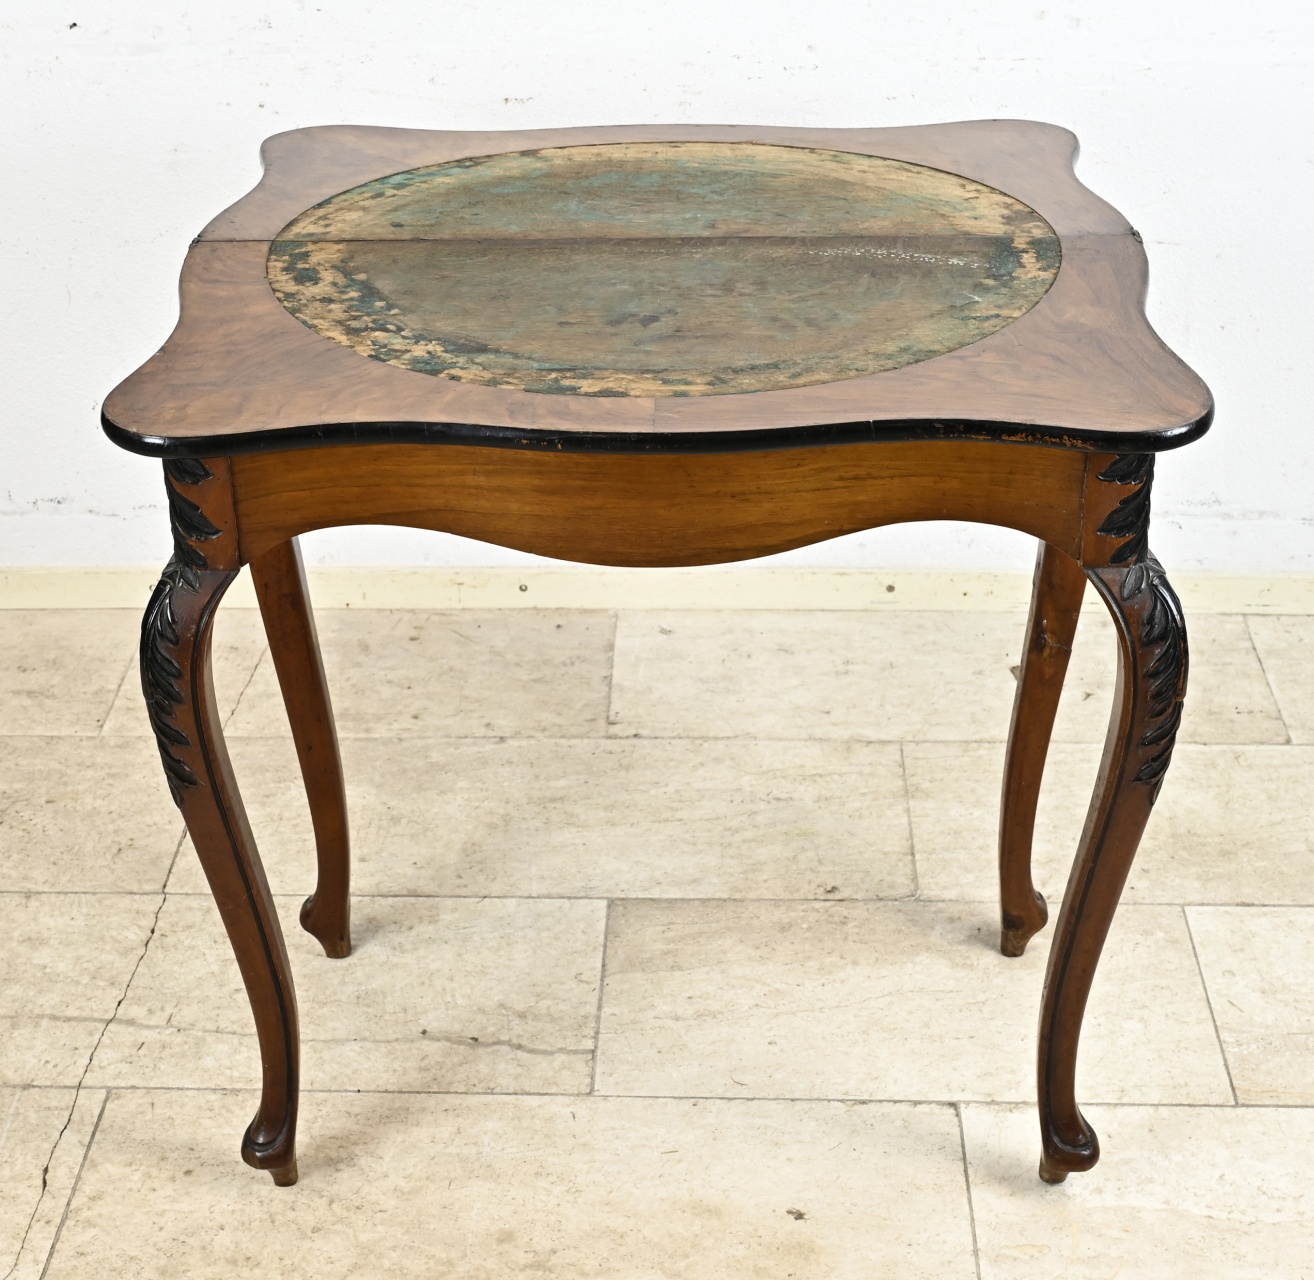 Antique Dutch gaming table - Image 2 of 2